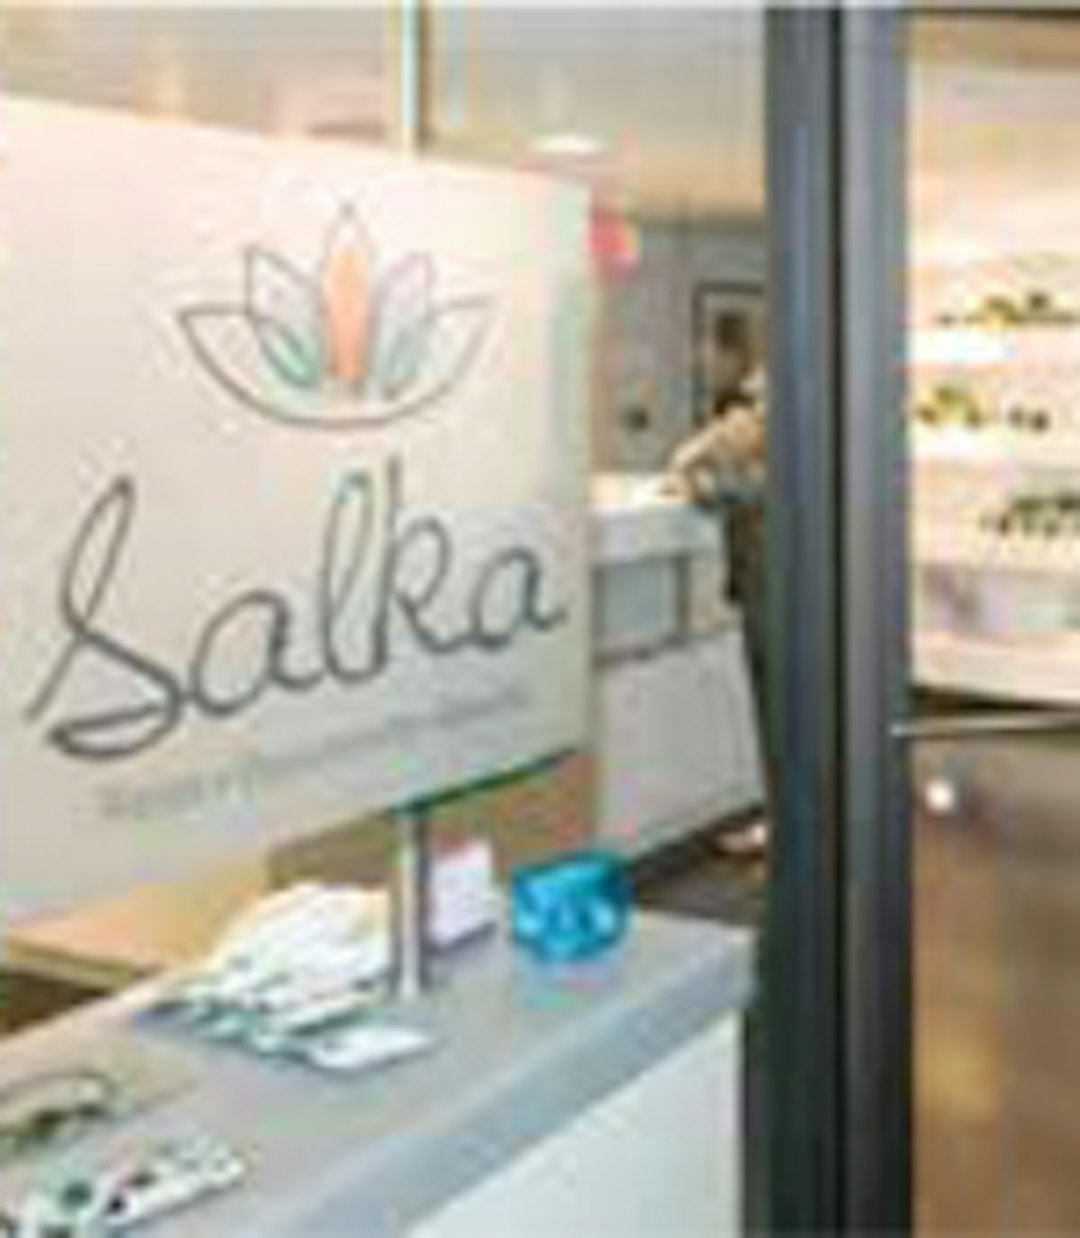 Glass door leading to a boutique with the name "salka" on the wall behind the checkout counter.